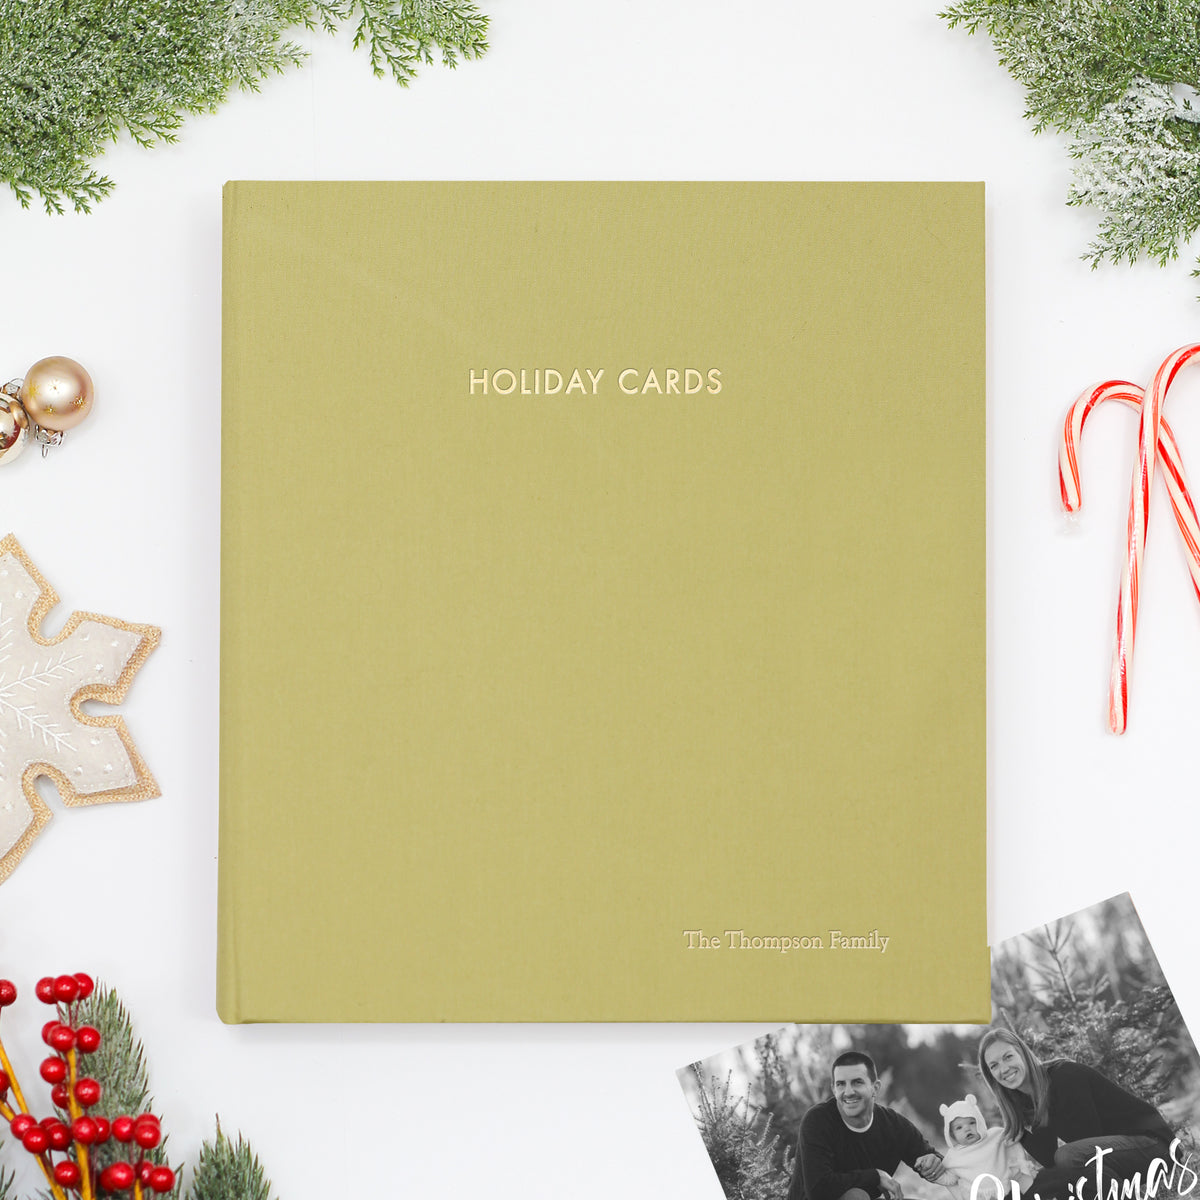 Holiday Card Album | Cover: Celery Cotton | Embossed with “Holiday Cards” | Available Personalized